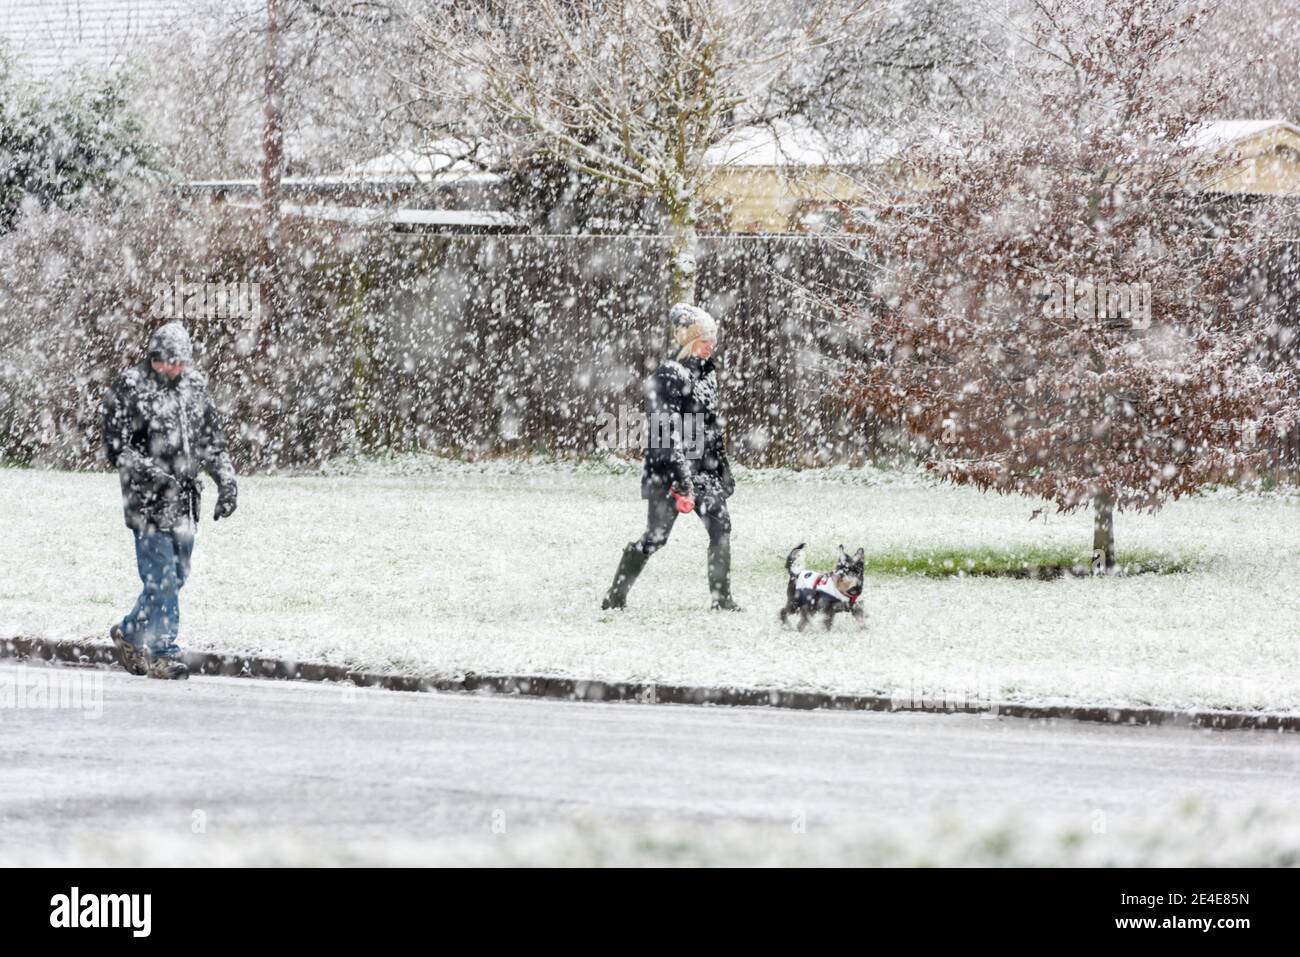 Willingham Cambridgeshire, UK. 23rd Jan, 2021. People walk their dog as a heavy snow shower falls in East Anglia in cold winter weather. Further snowfall is forecast across parts of the UK with freezing temperatures over the next few days. Credit: Julian Eales/Alamy Live News Stock Photo